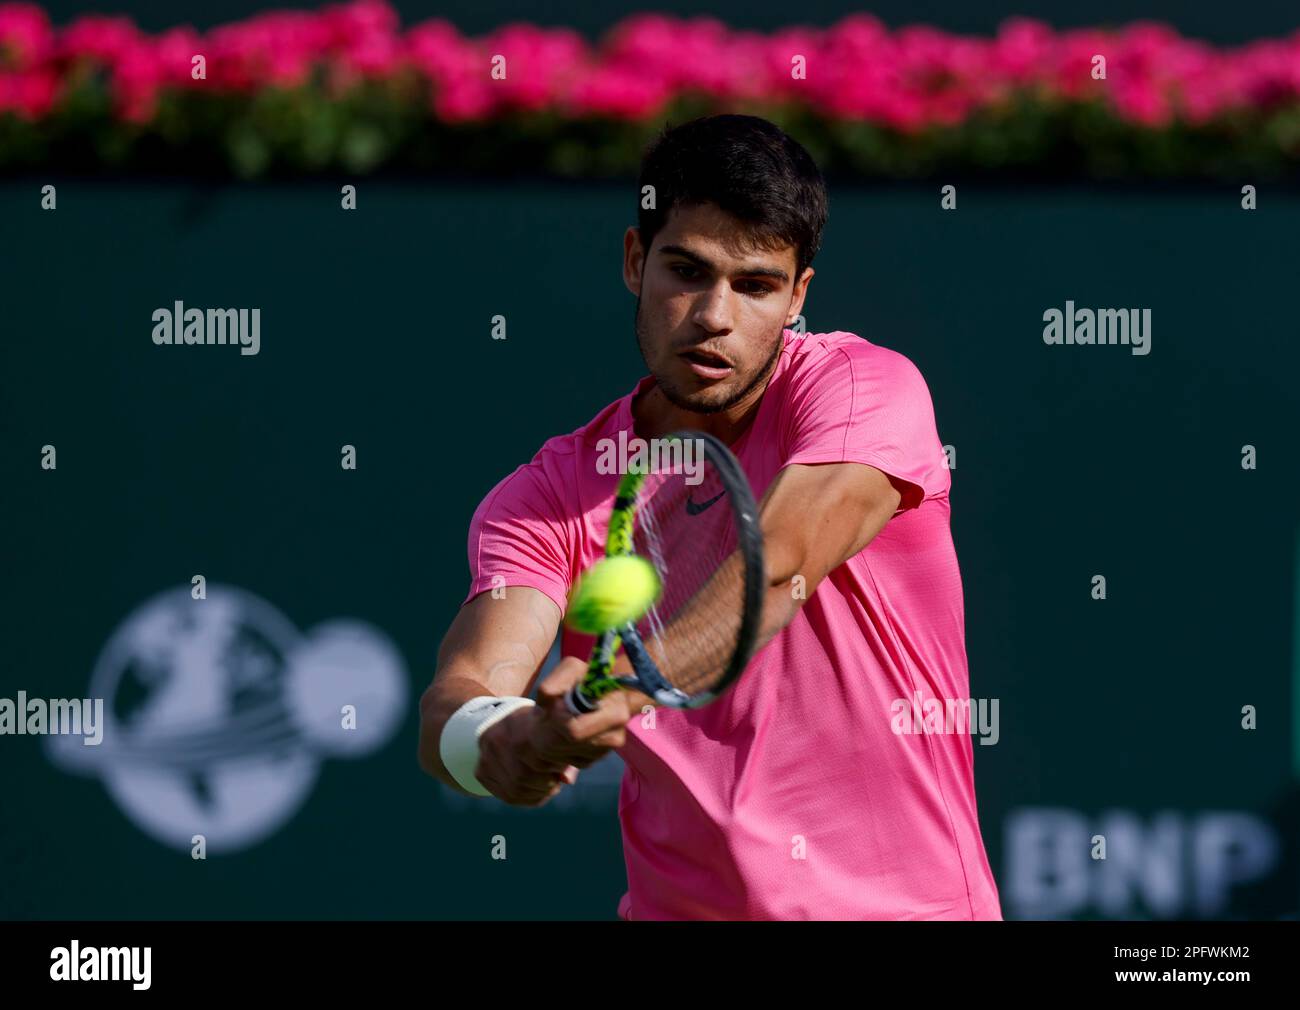 March 18, 2023 Carlos Alcaraz of Spain returns a shot against Jannik Sinner of Italy during a semifinal match at the 2023 BNP Paribas Open at Indian Wells Tennis Garden in Indian